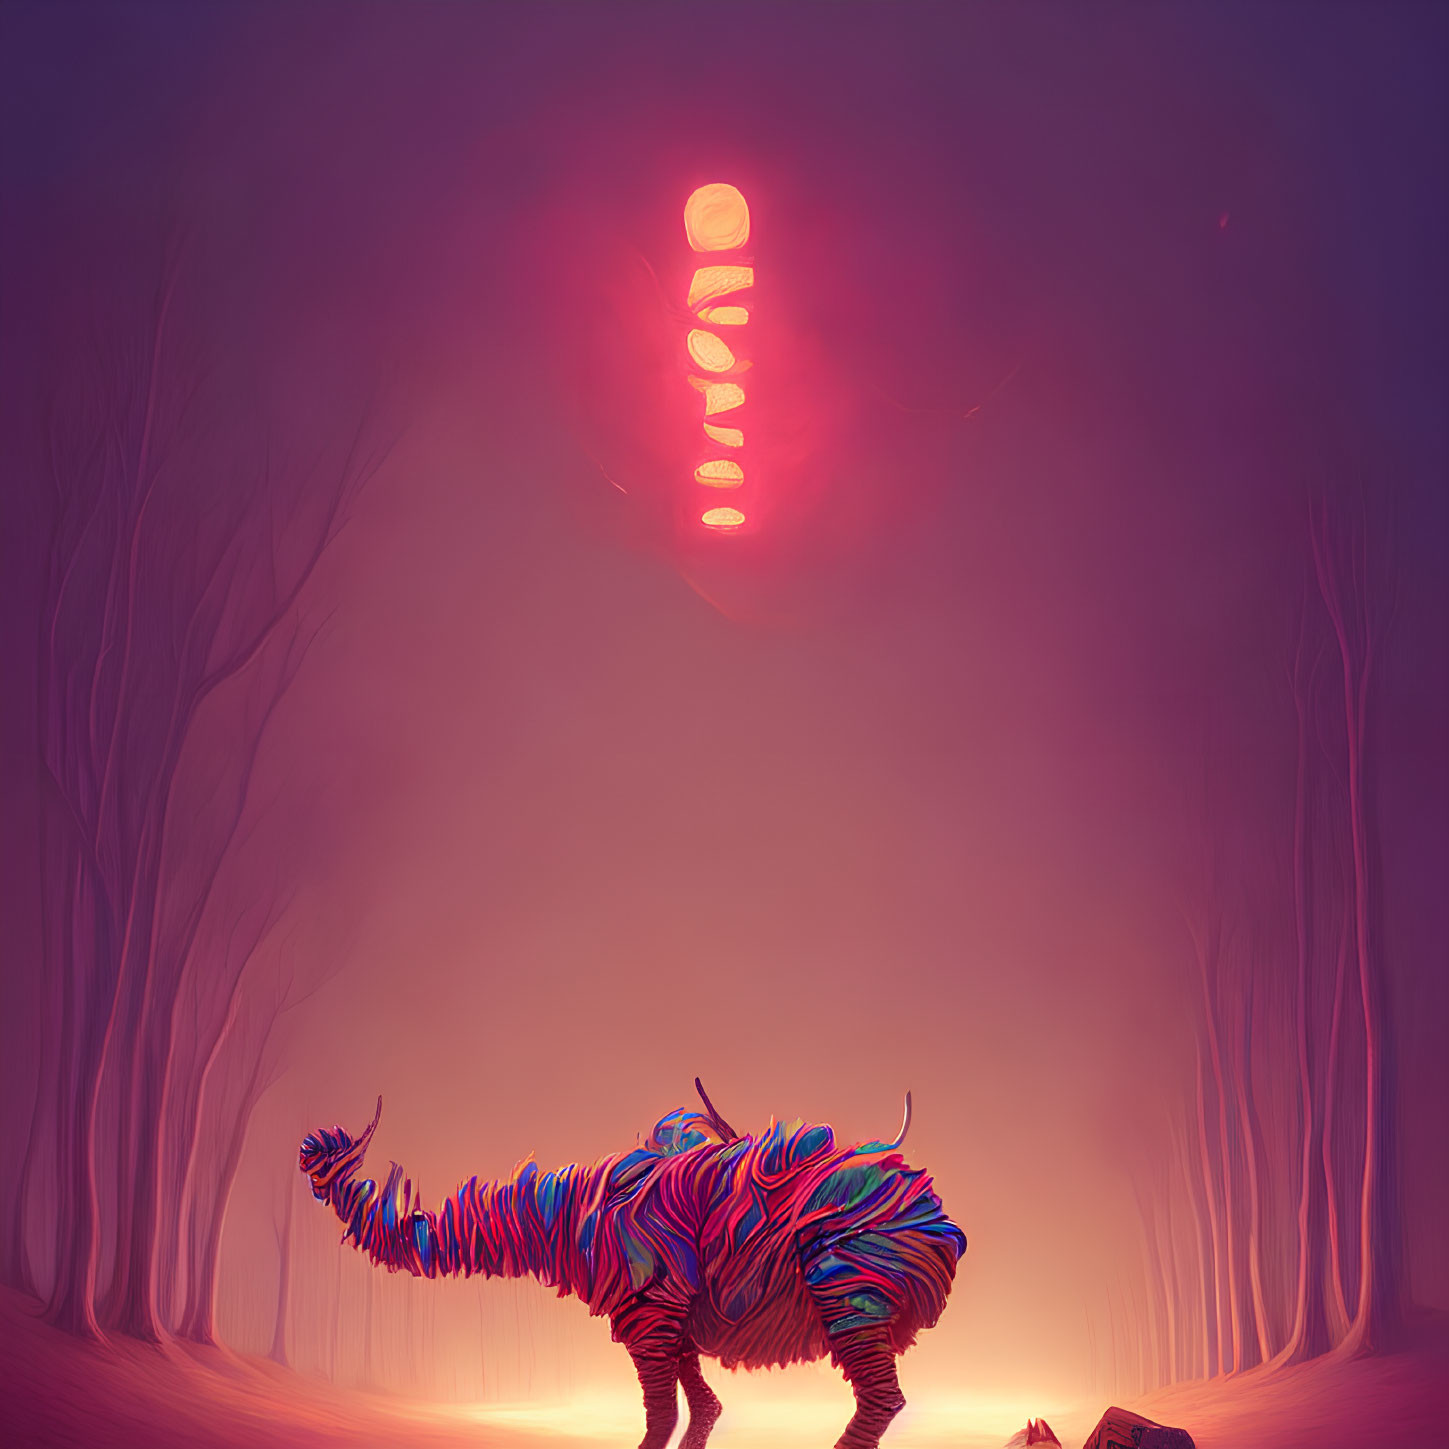 Colorful Striped Tiger Creature in Misty Forest with Glowing Symbol